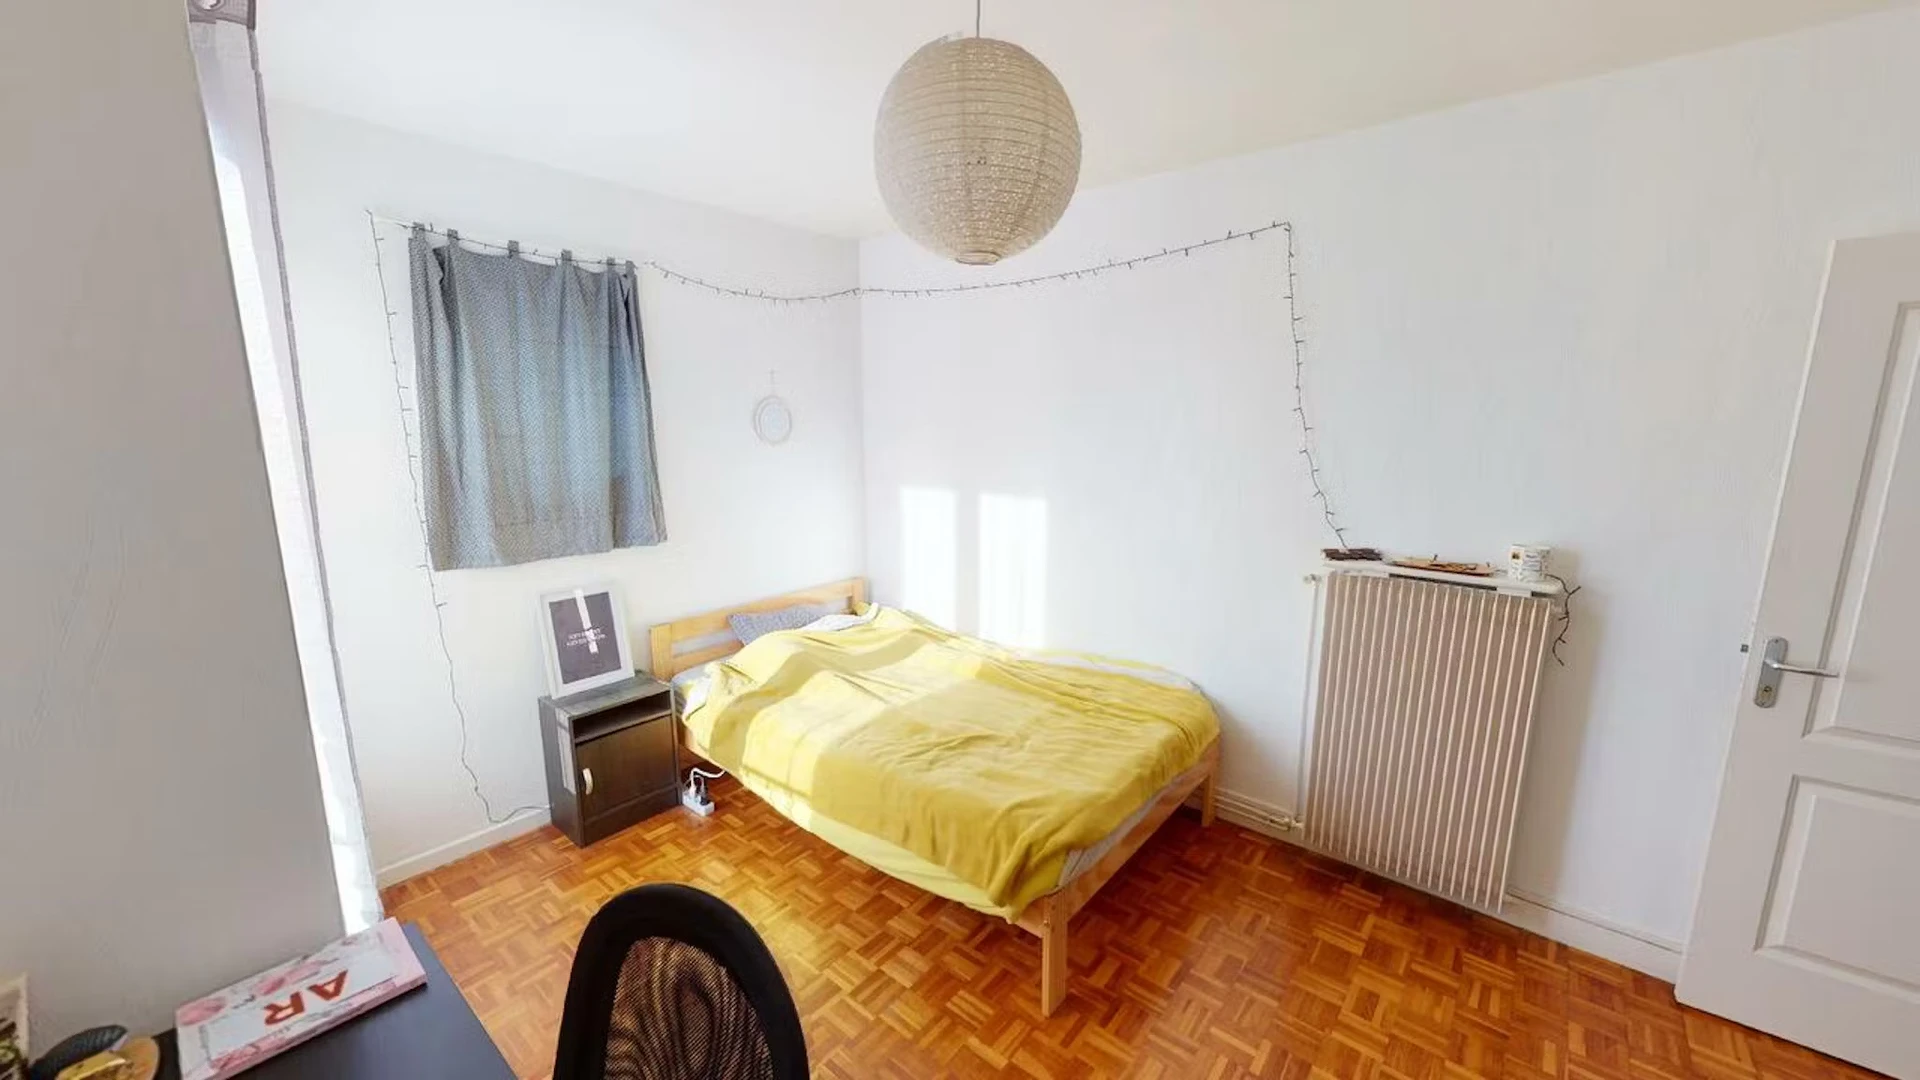 Room for rent in a shared flat in Dijon